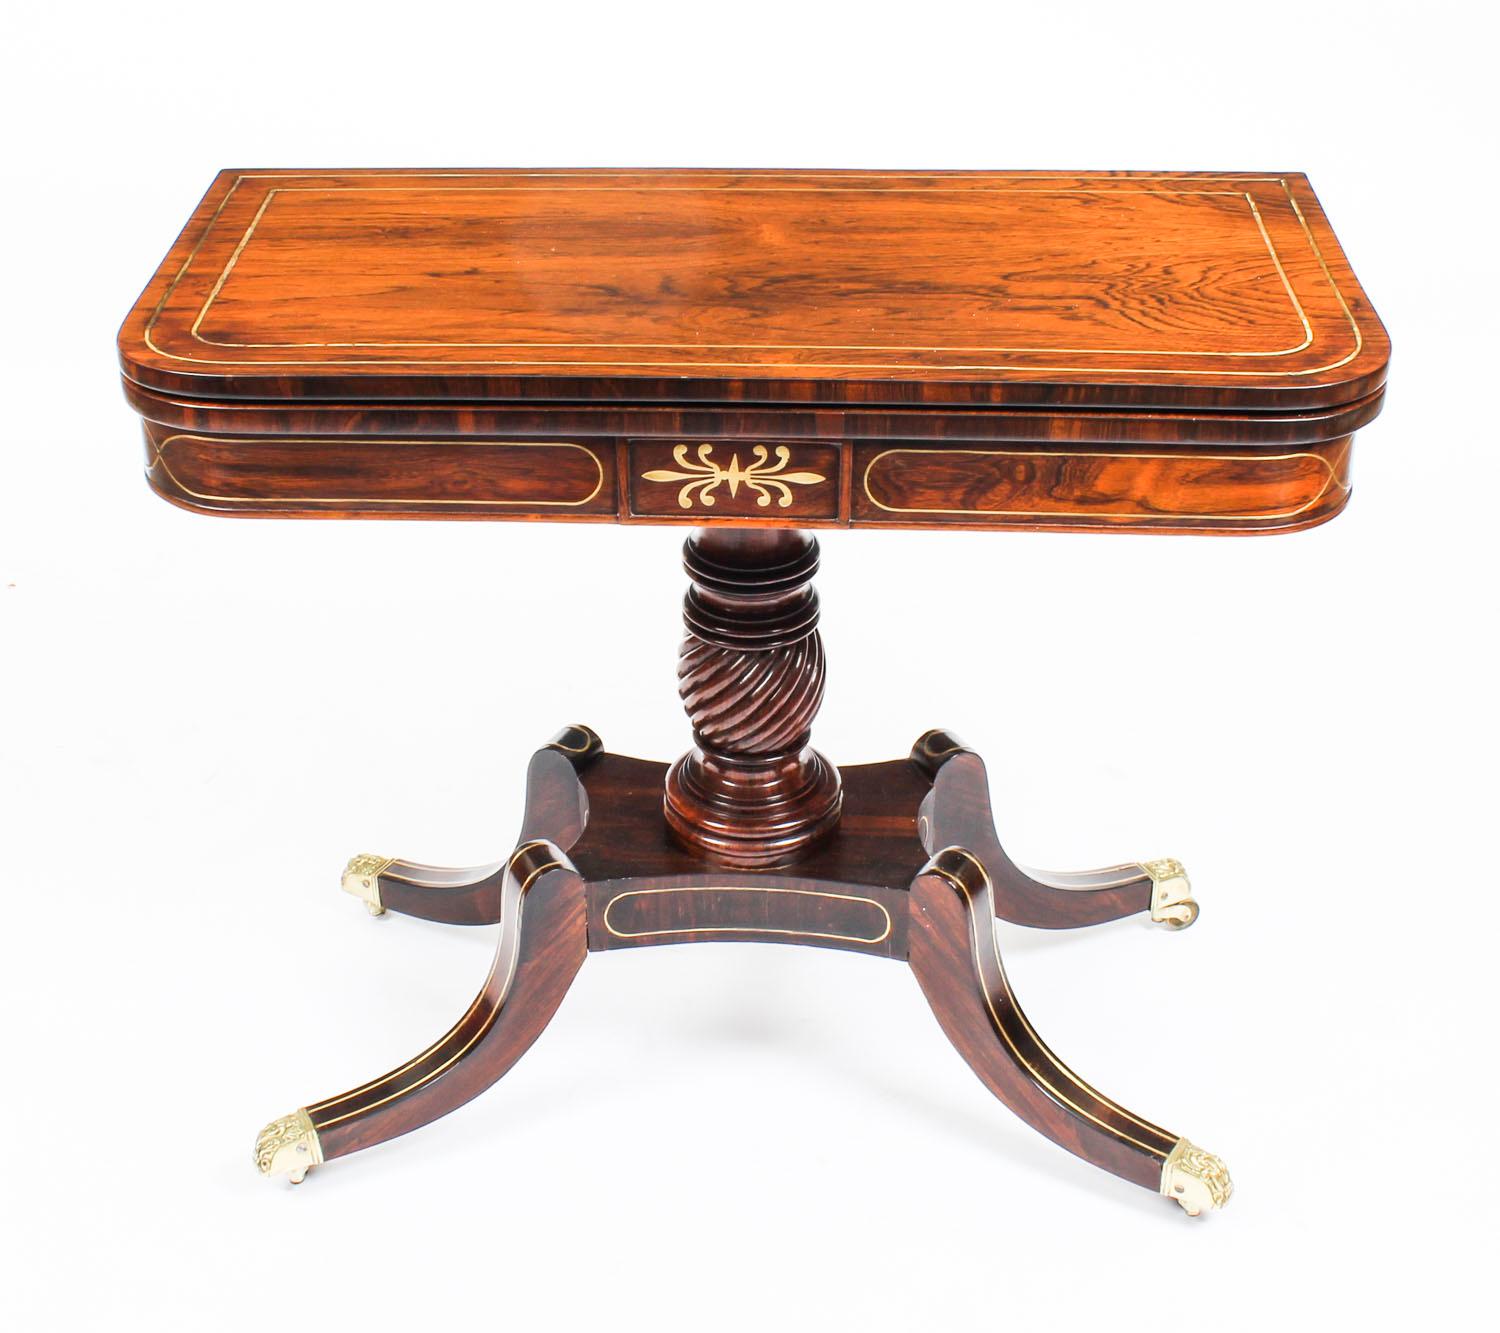 This is a very attractive antique English Regency rosewood and brass inlaid card table, circa 1825 in date.

This rectangular card table is made from beautiful rosewood, the folding top enclosing a green baize lined playing surface. It has